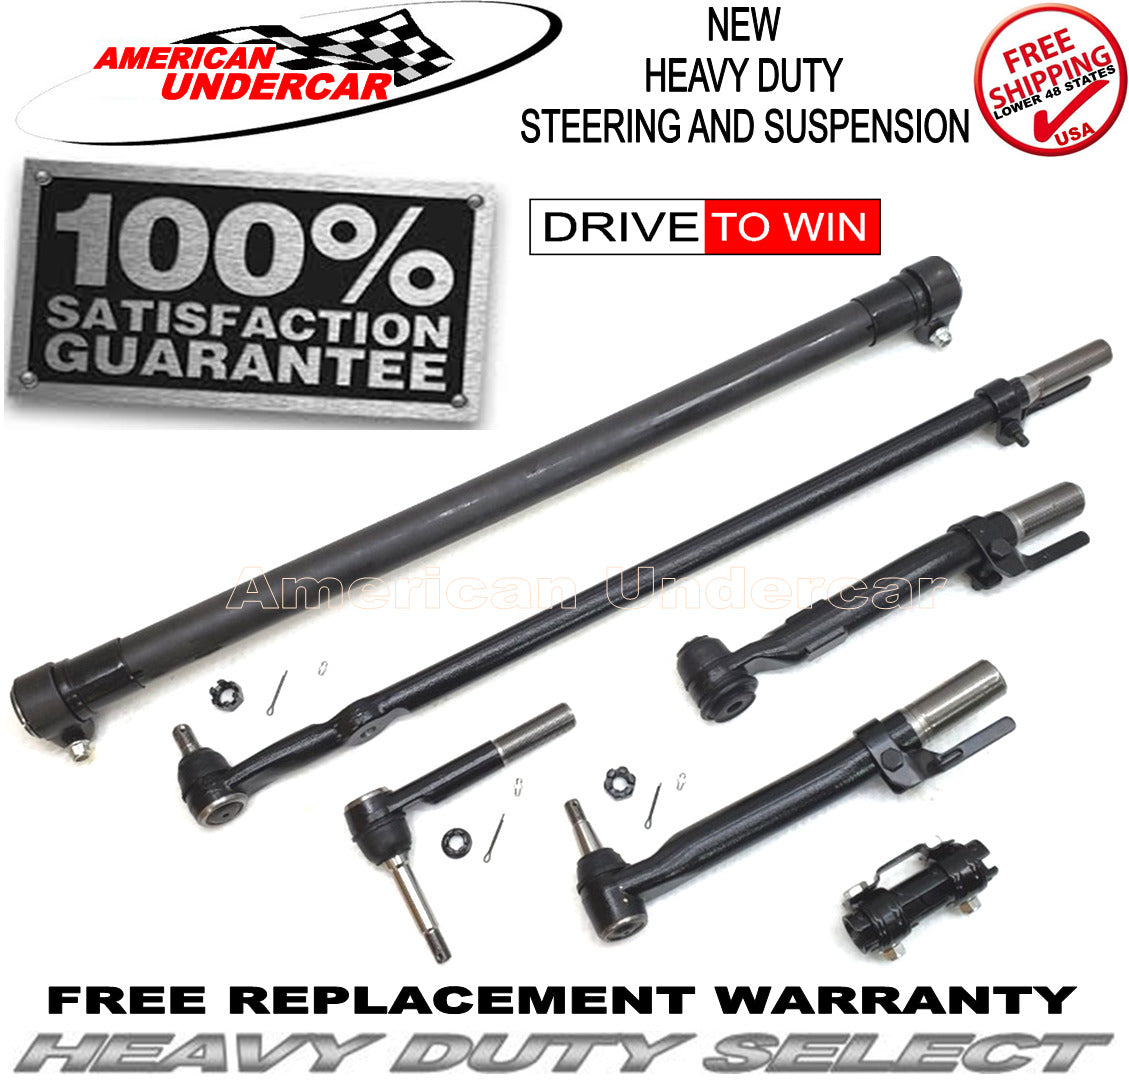 HD Drag Link Tie Rod Sleeve Steering Kit for 2005-2007 Ford F250, F350 4x4